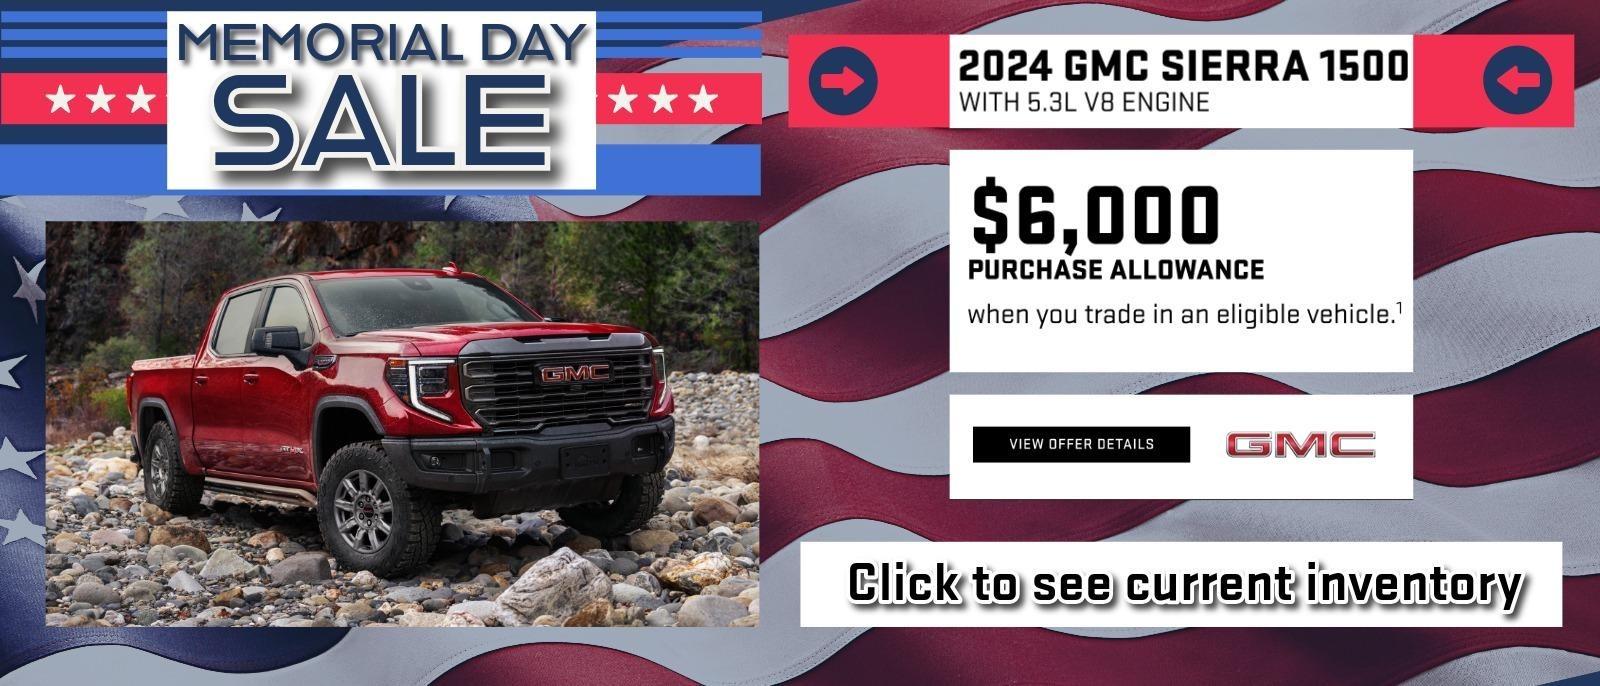 Memorial Day slide showing offers for 2024 GMC Sierra 1500 with 5.3L V8 engine.  $6,000 purchase allowance available when you trade in an eligible vehicle.  See dealer for details.